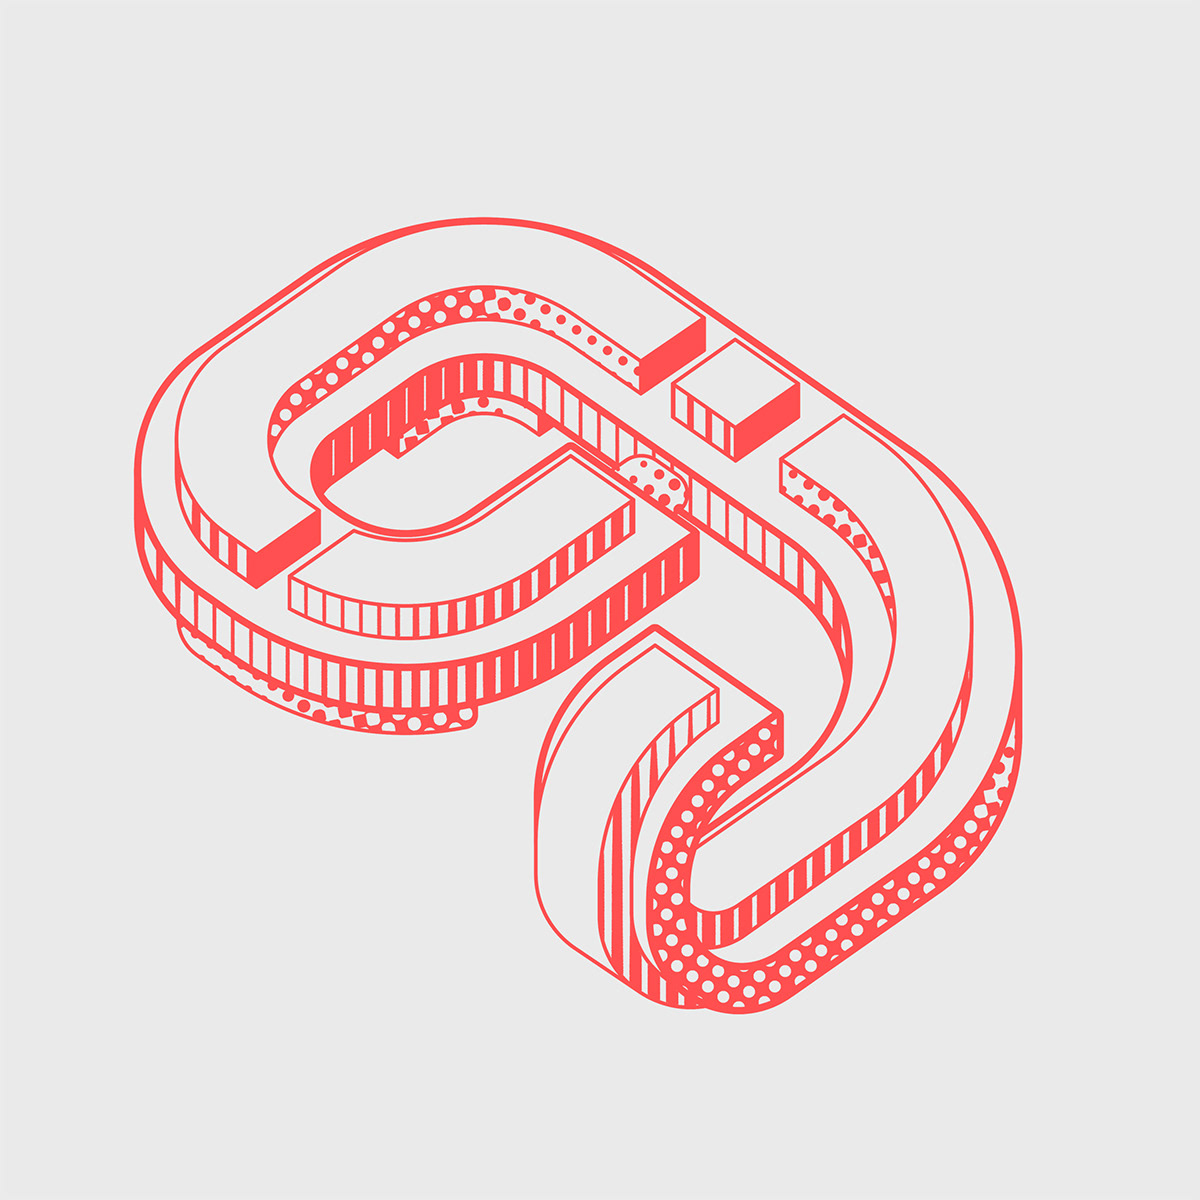 2.5D 3D lettering 3D Type adobe illustrator charles williams Isometric lettering numbers typography   vector